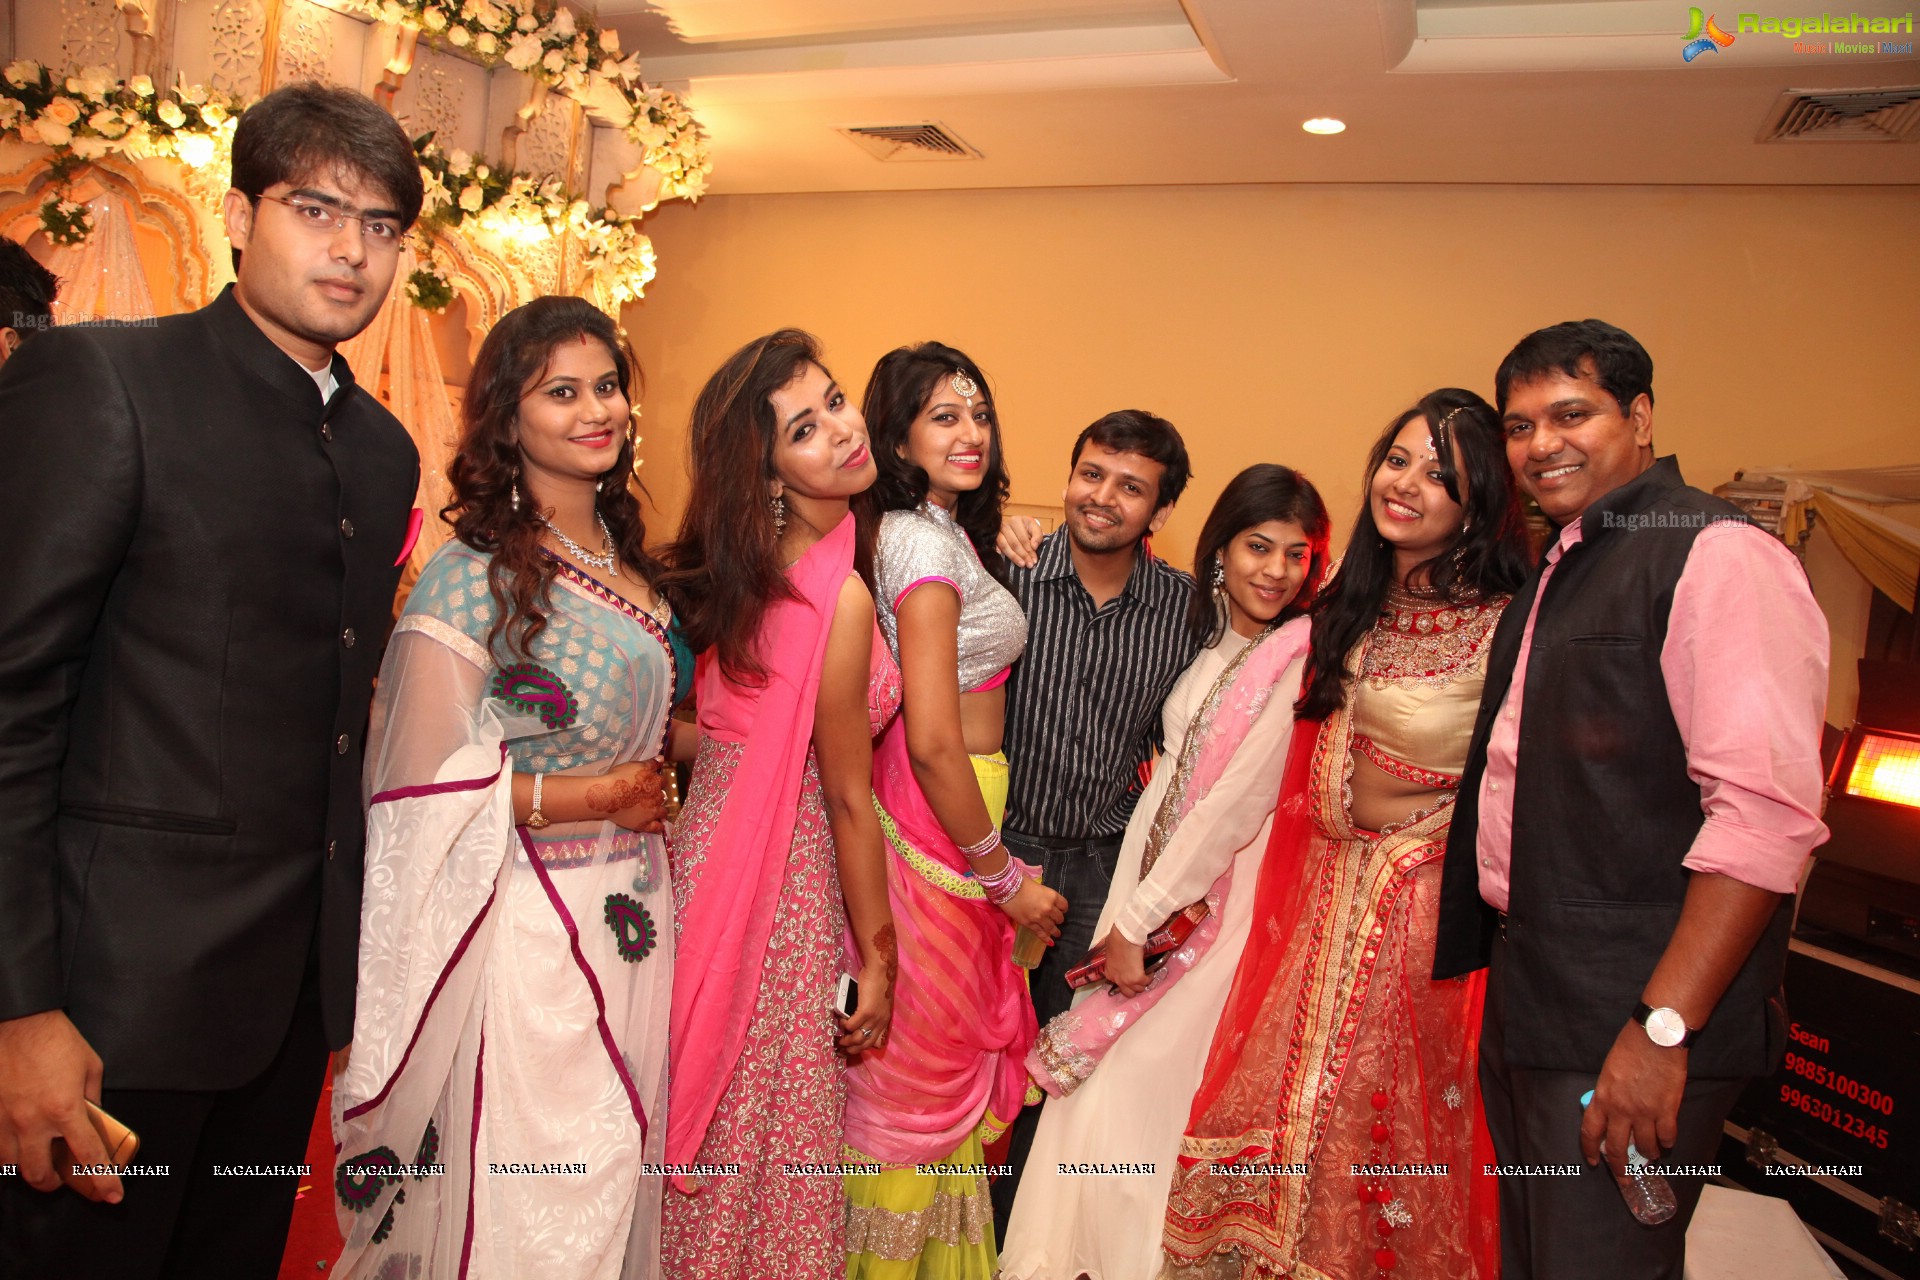 Wedding Ceremony of Chunki and Anand at Dreamland Gardens, Hyderabad